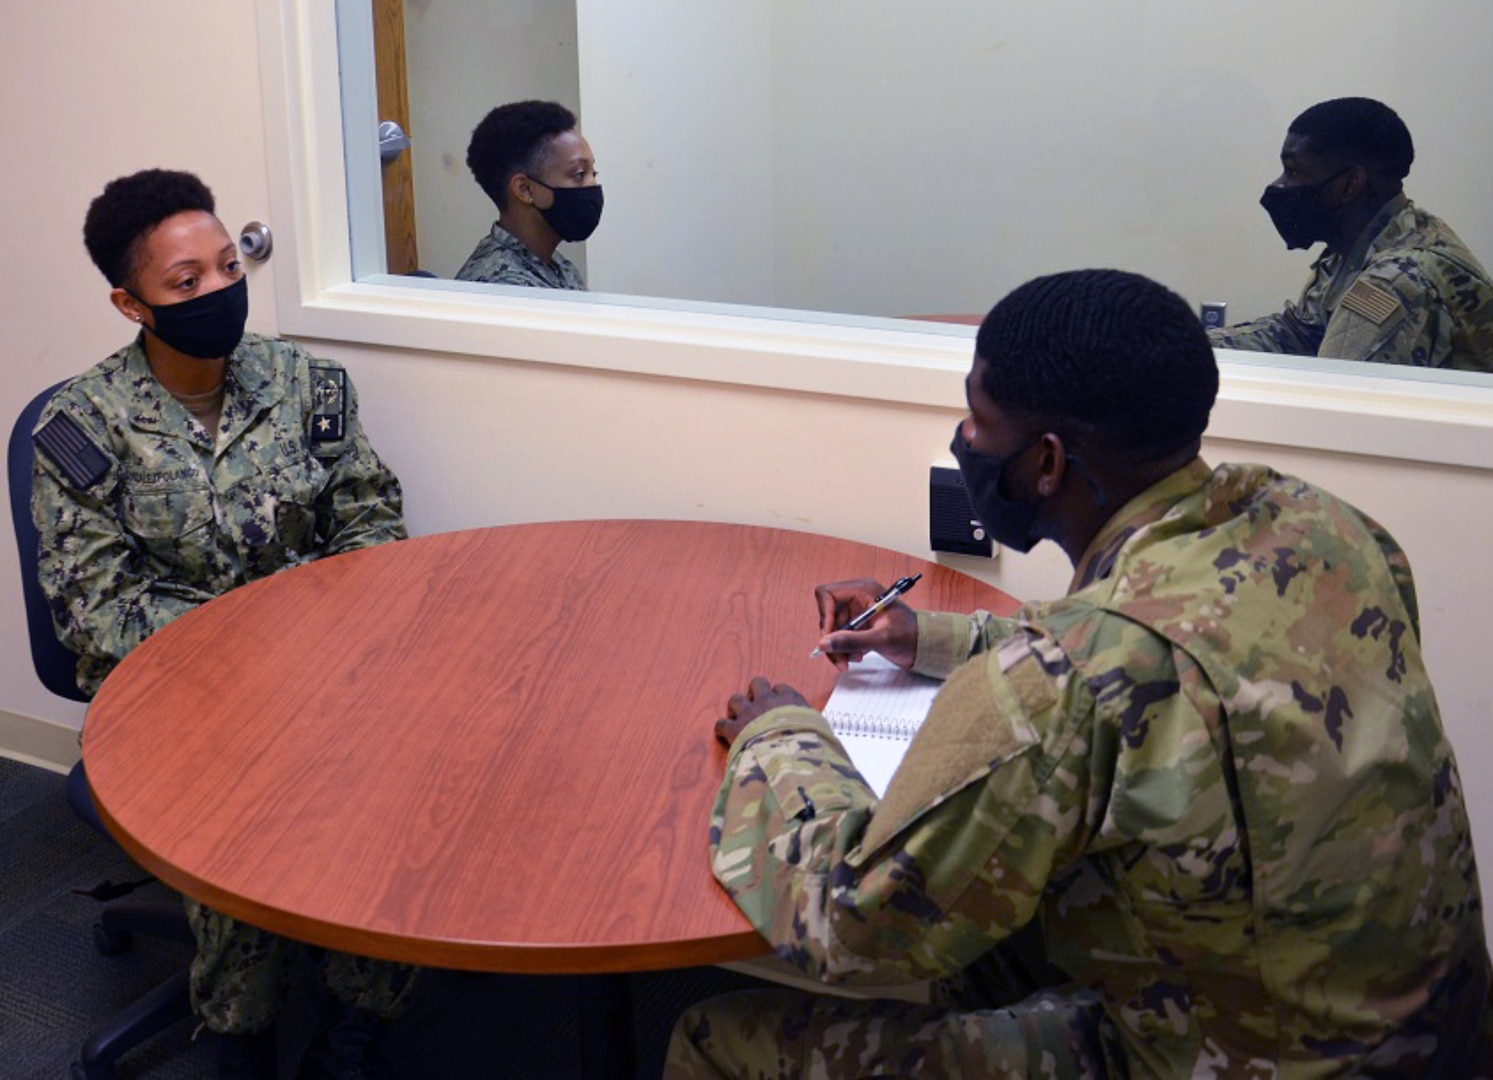 Airman Frederick Hall, (right) an Air Force student in the METC Behavioral Health Technician program, conducts a mock counseling session with Seaman Chery Gonzales-Polanco, (left), a Navy student acting as a patient in the simulation.